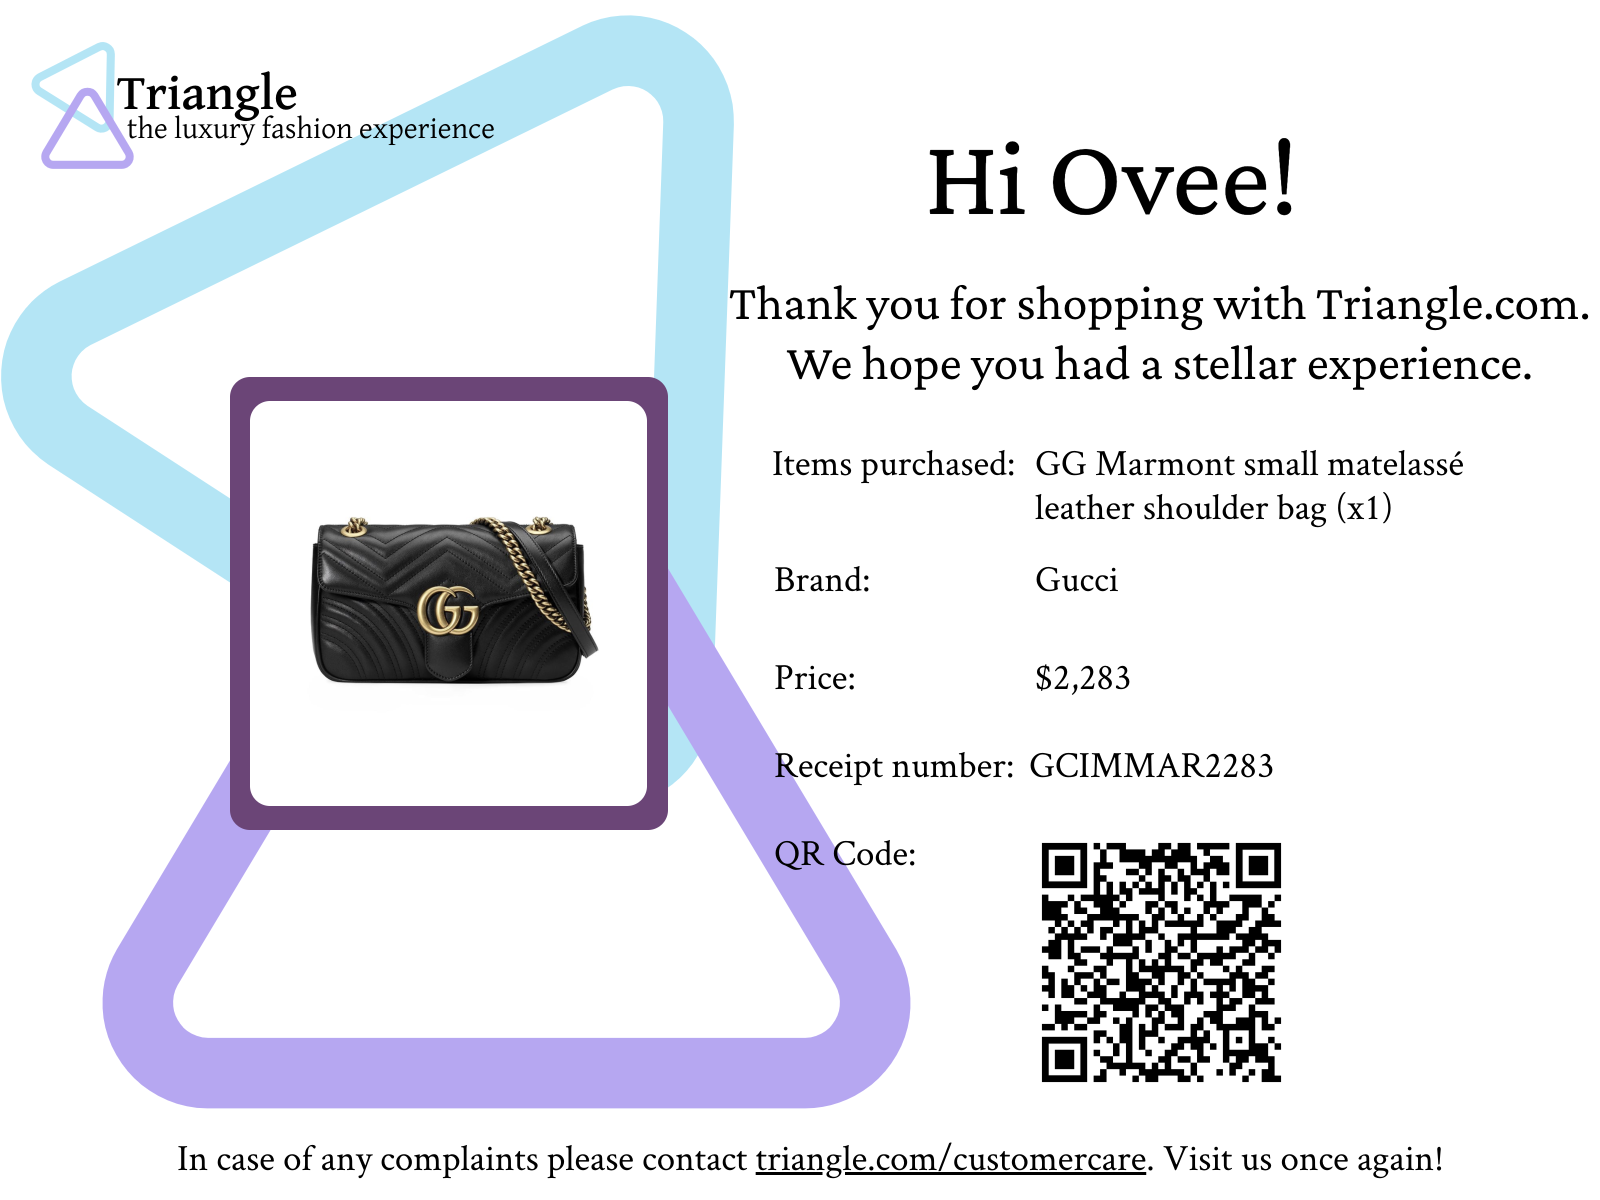 Email Receipt by Ovee Jawdekar on Dribbble